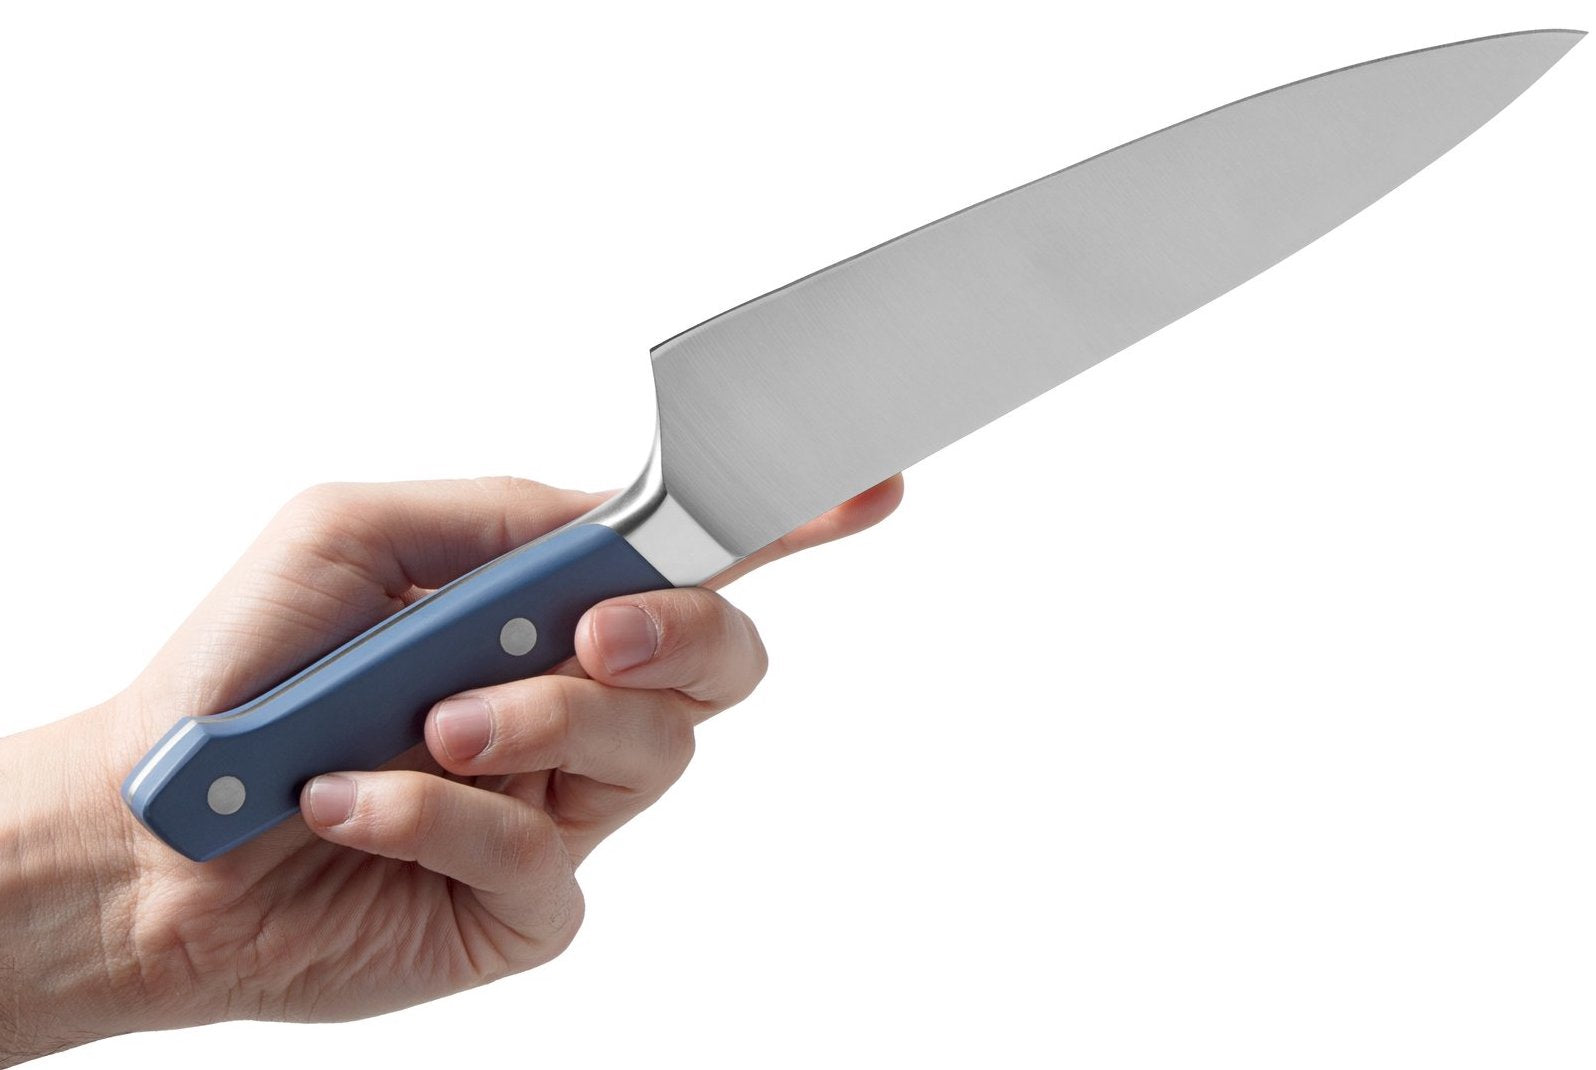 Rockwell hardness scale: a hand holds a Misen chef's knife